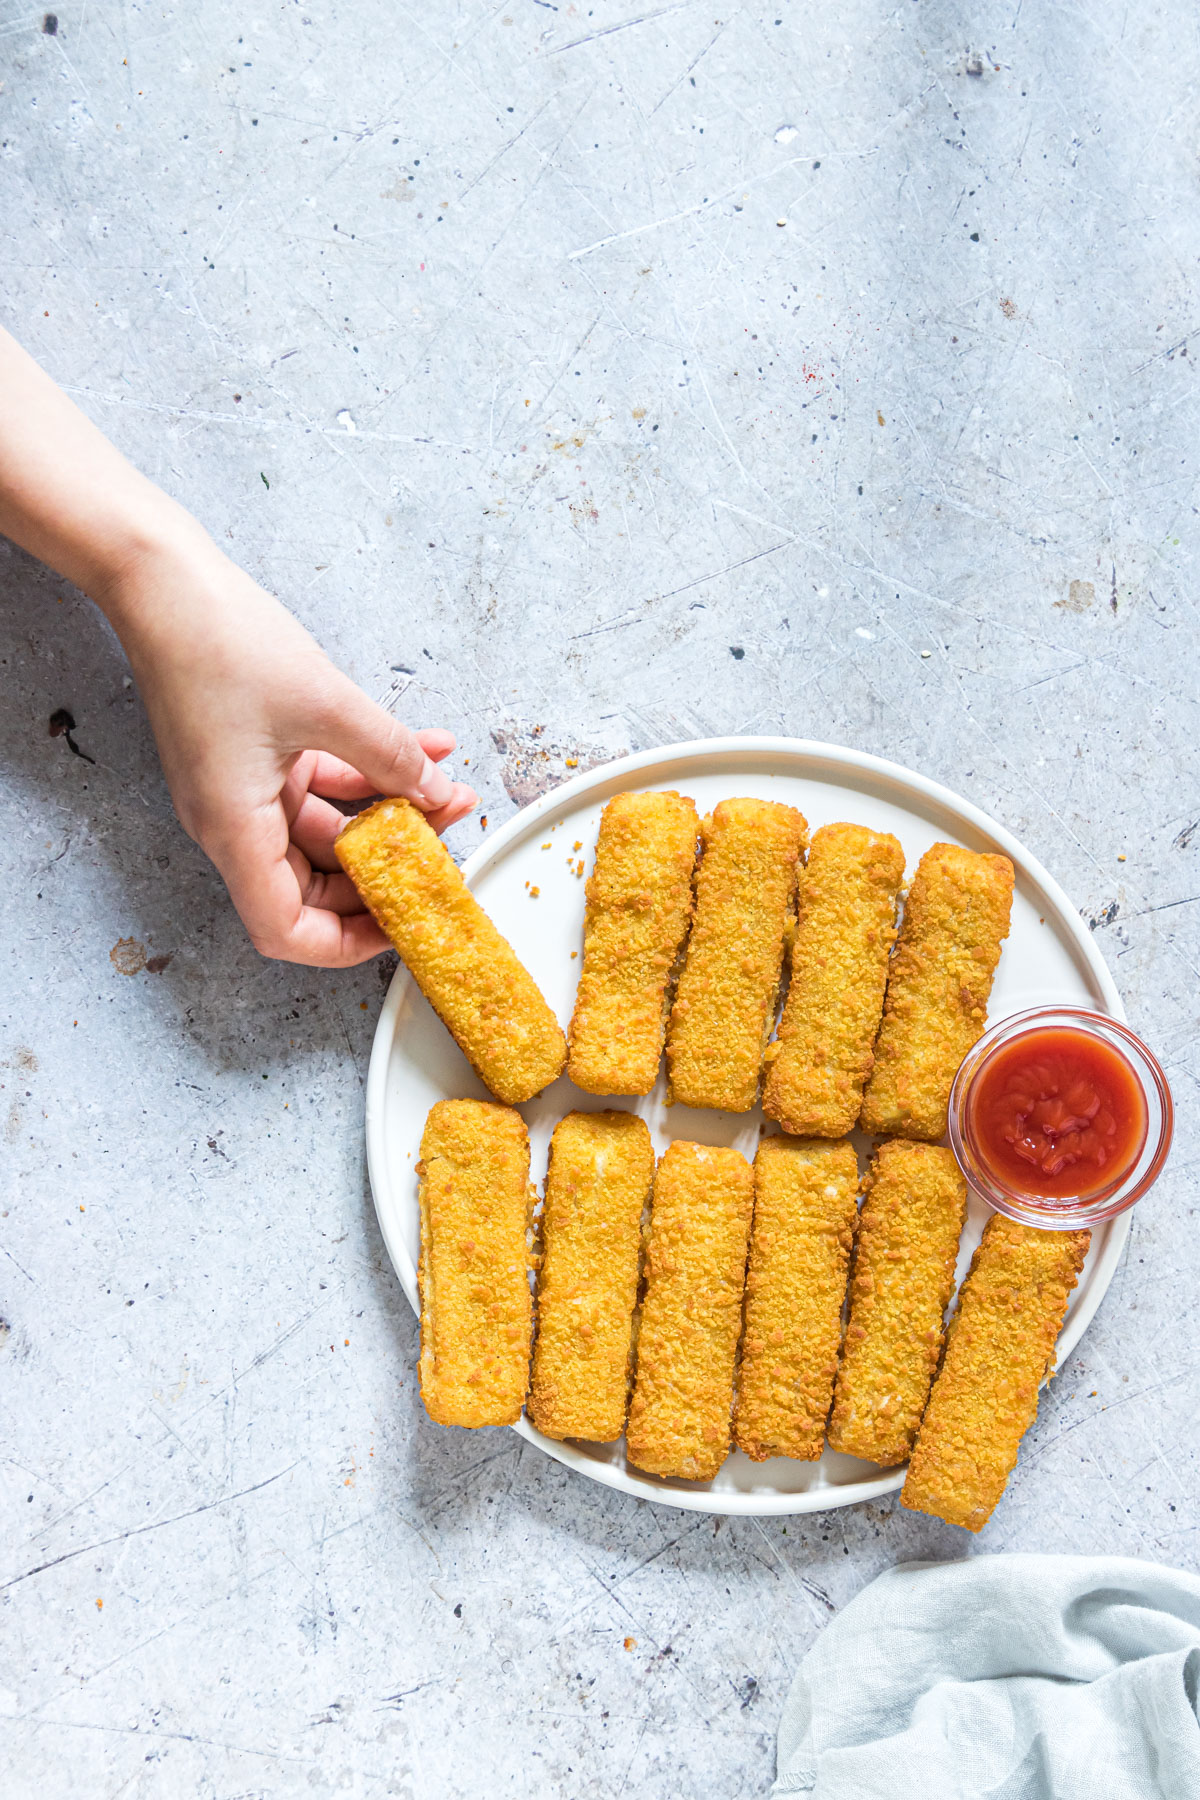 kids hand taking one of the air fryer frozen fish sticks from a white plate